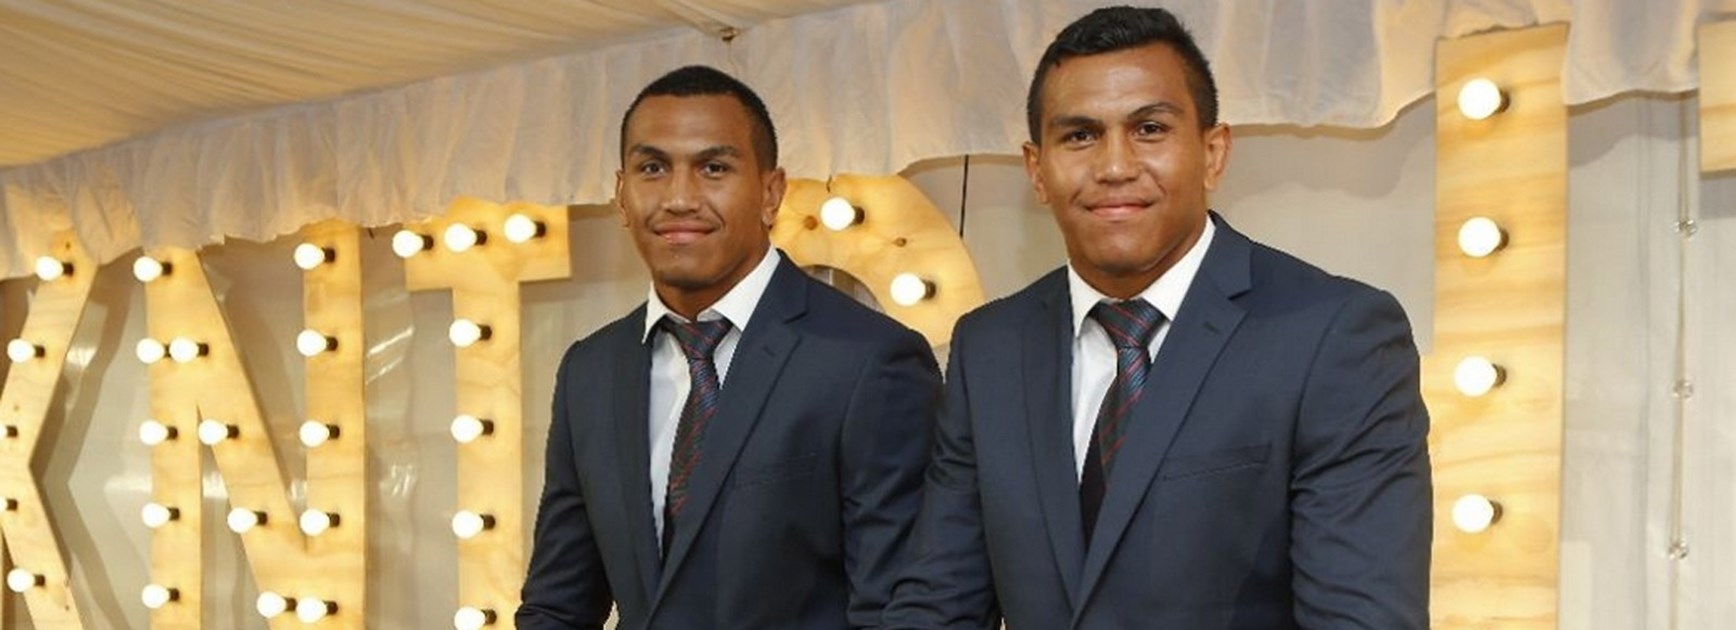 Twins Jacob and Daniel Saifiti will make their NRL debut alongside each other for the Knights in Round 1.